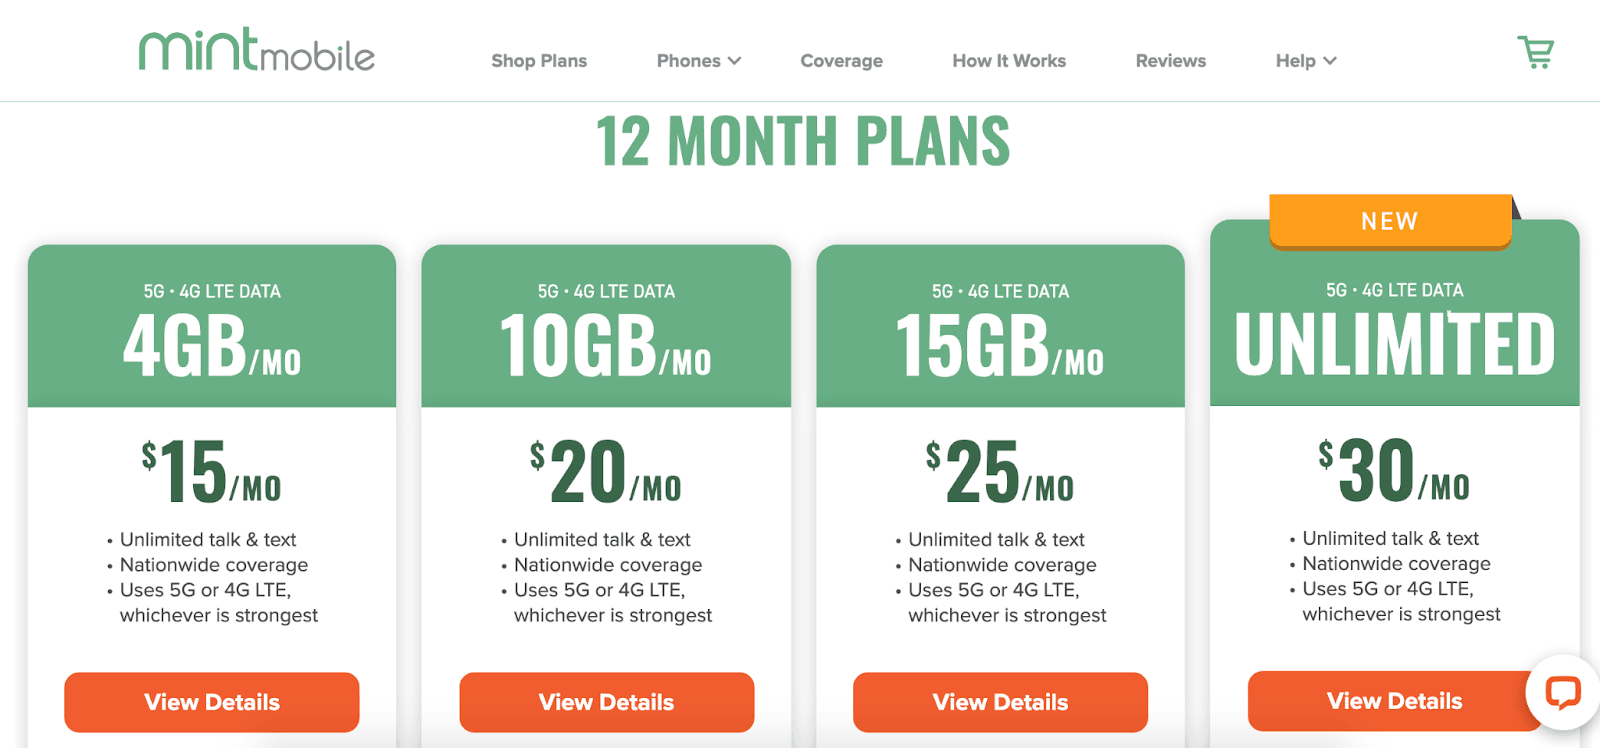 Mint Mobile Review: My Experience Researching Mint Mobile - Plan options #2